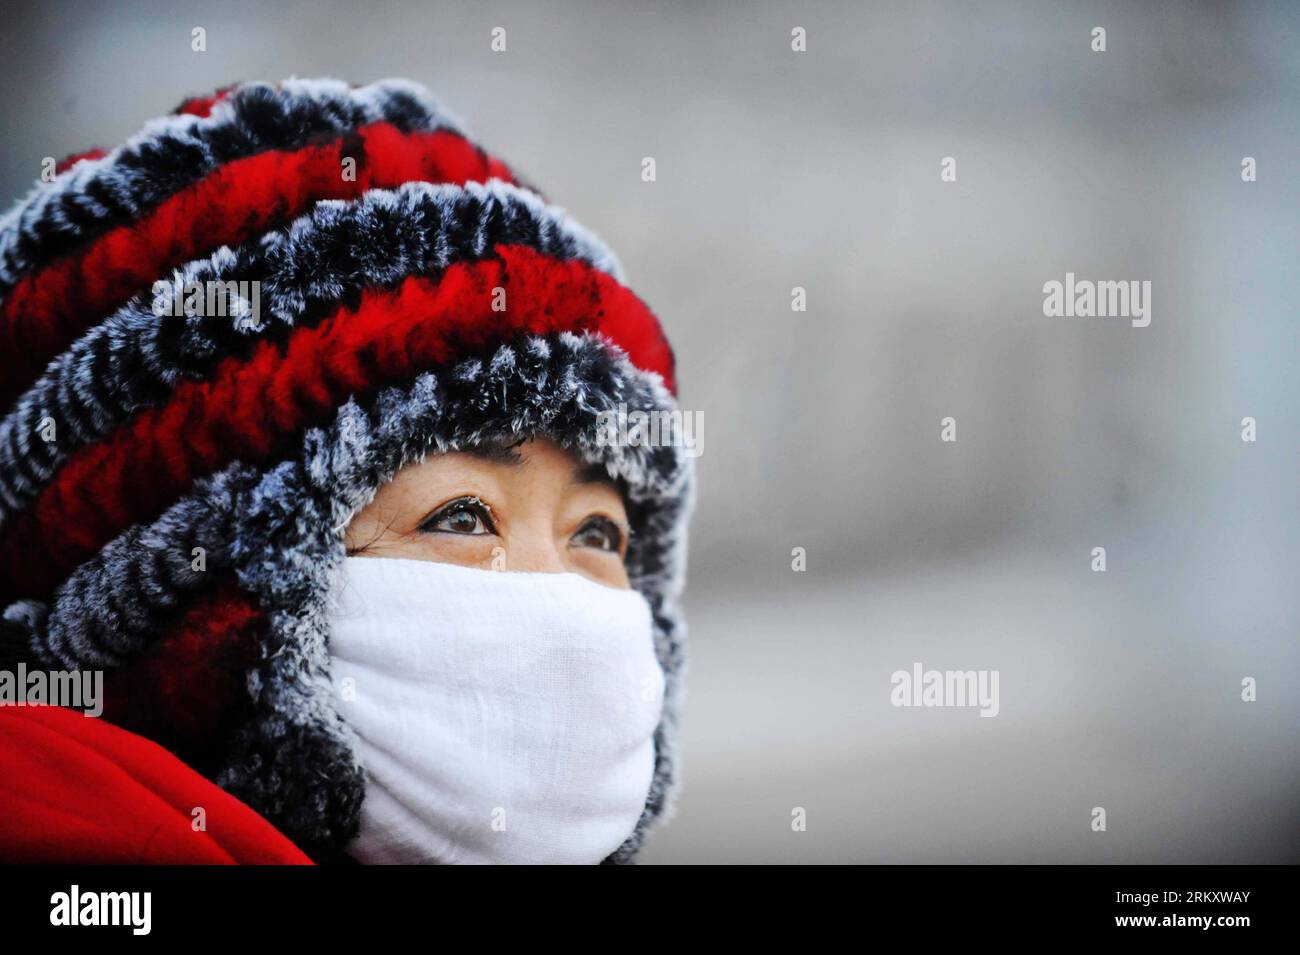 Bildnummer: 59095366  Datum: 16.01.2013  Copyright: imago/Xinhua HARBIN, Jan. 16, 2013 (Xinhua) -- Cold weather makes frost stick to eyelash on the face of sanitation worker Yang Weixia who wears a mask in Harbin, capital of northeast China s Heilongjiang Province, Jan. 16, 2013. Yang Weixia, 48, is an ordinary sanitation worker living in Harbin, a city known for its bitterly cold winters and often called the Ice City. For 32 years, Yang has never stopped sweating away at her work, though she often gets up at three o clock every morning and will not go back home until 9 in the evening in the c Stock Photo